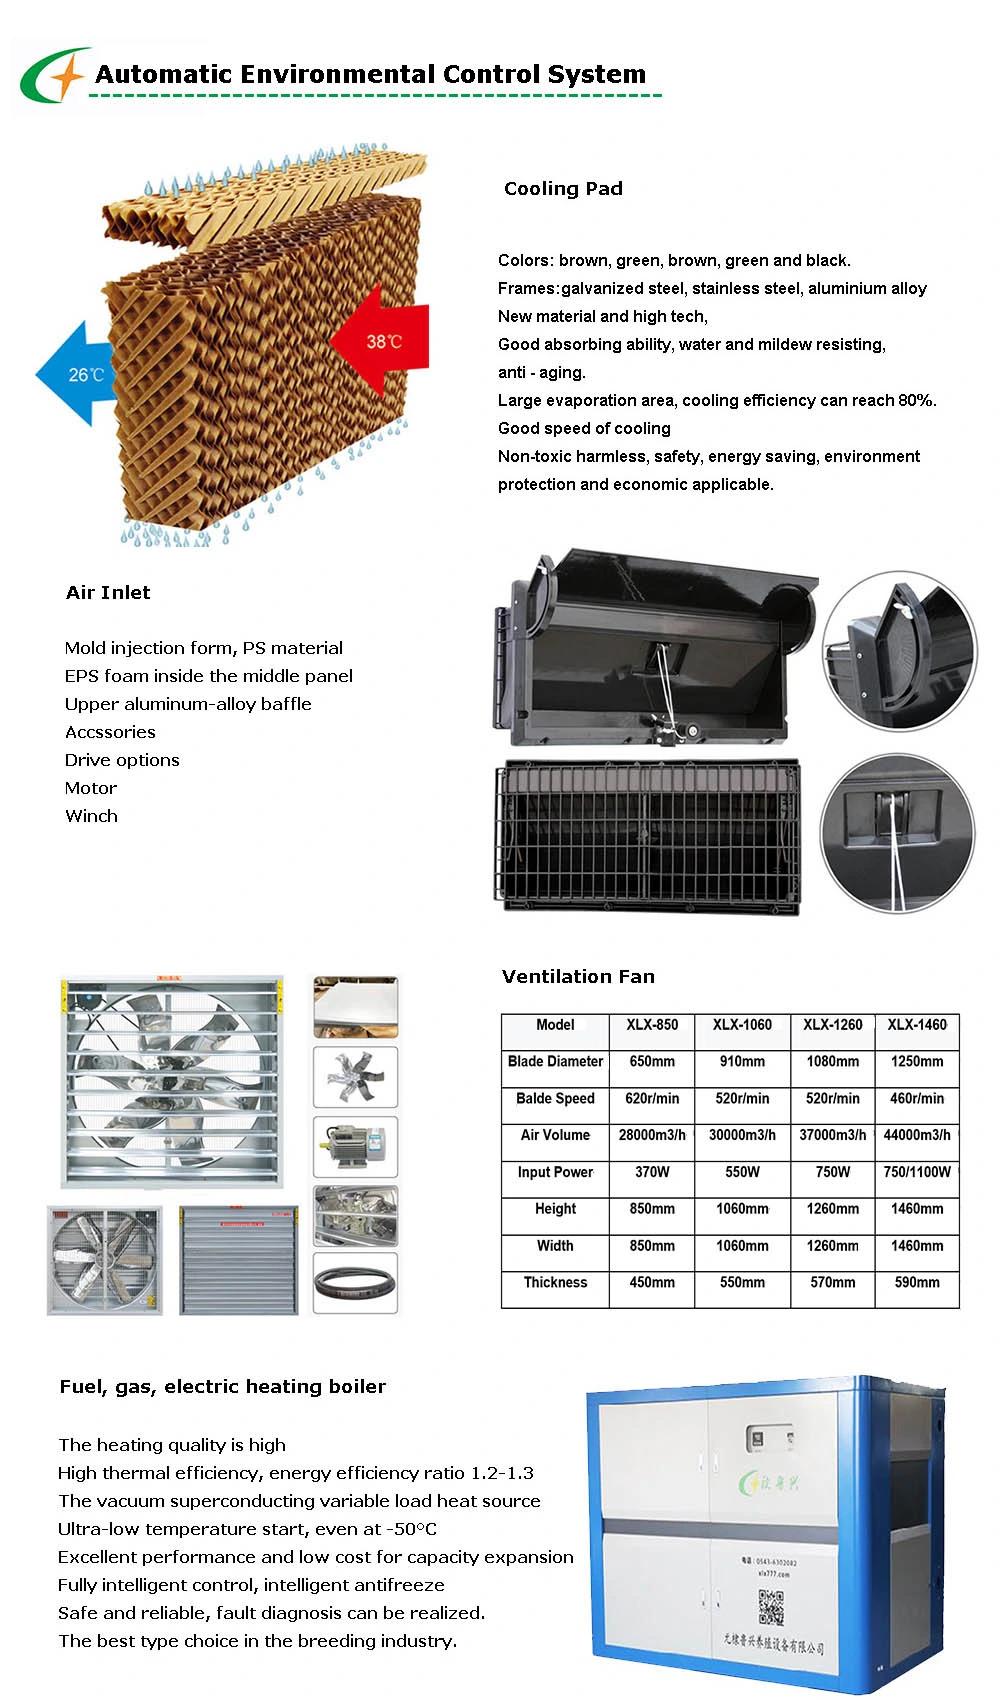 Boiler Chicken Open House Battery Cage System for Wholesales